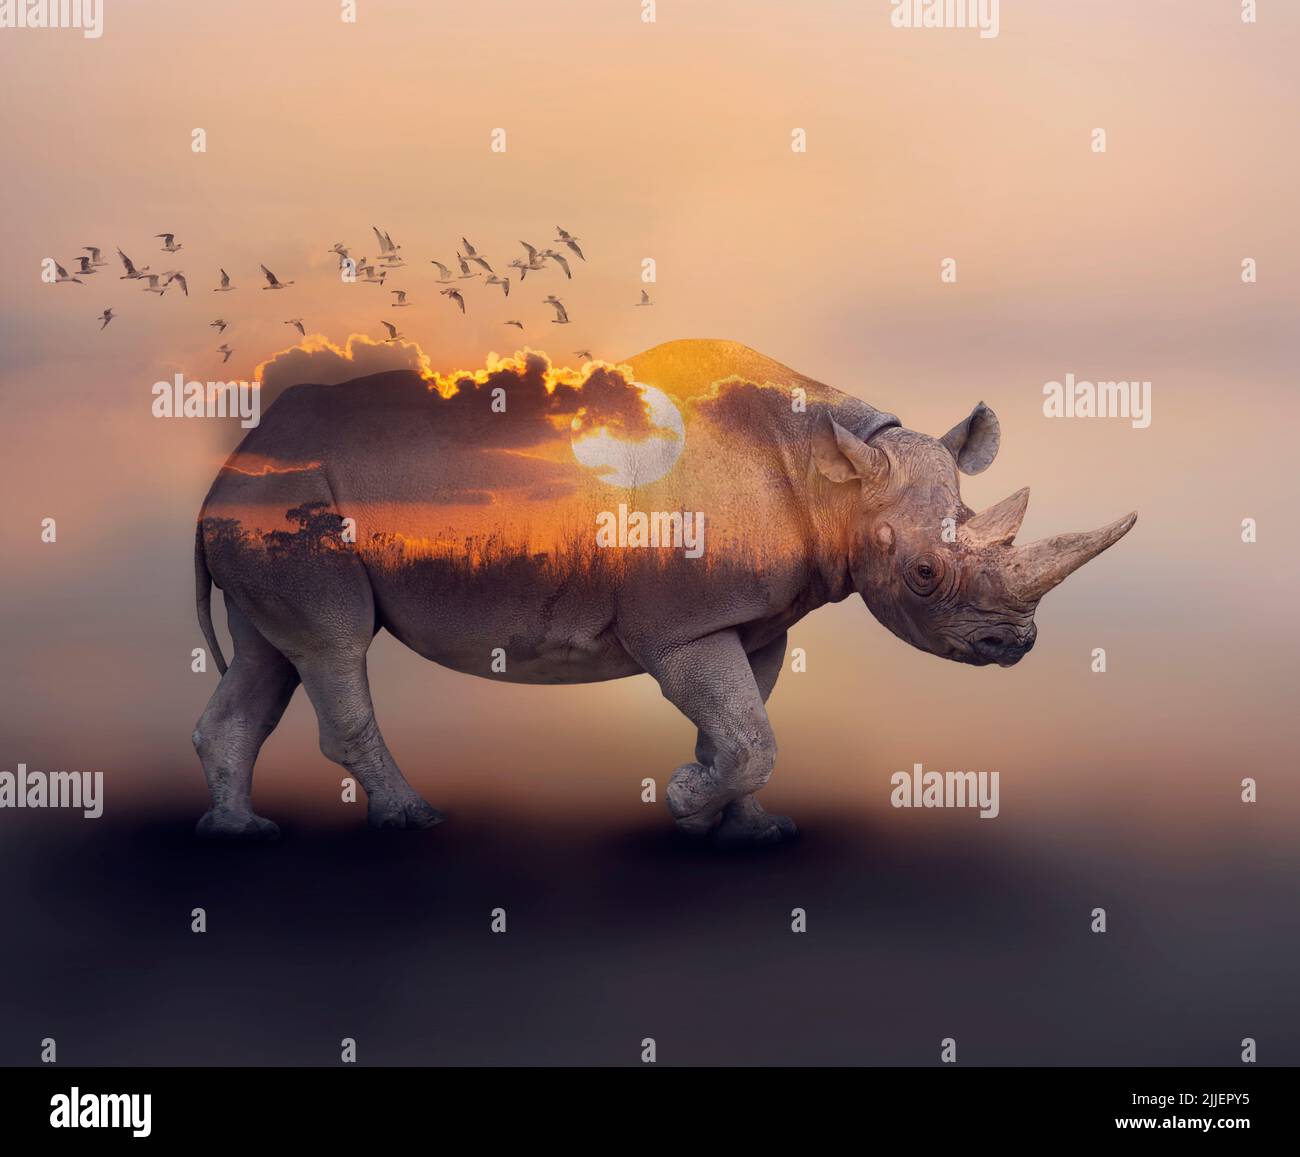 Double Exposure Effect of Rhinoceros at Sunset Stock Photo